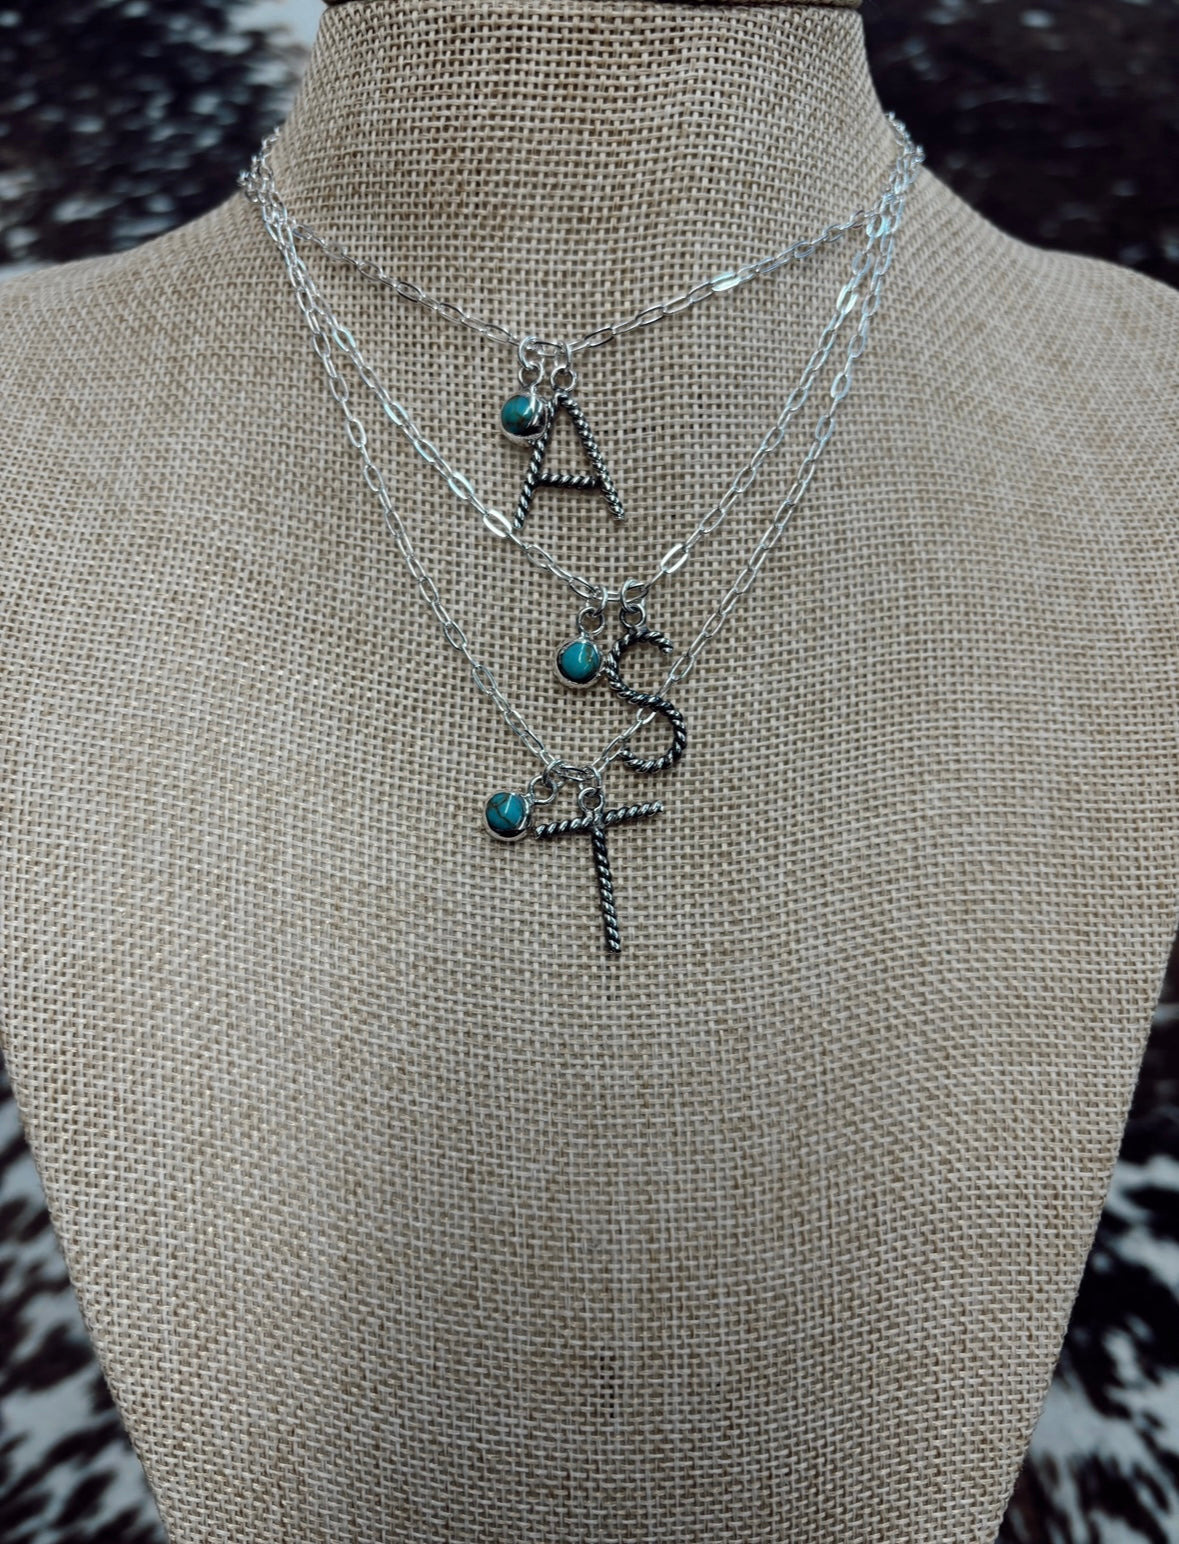 The Gone Ropin' Initial Necklace